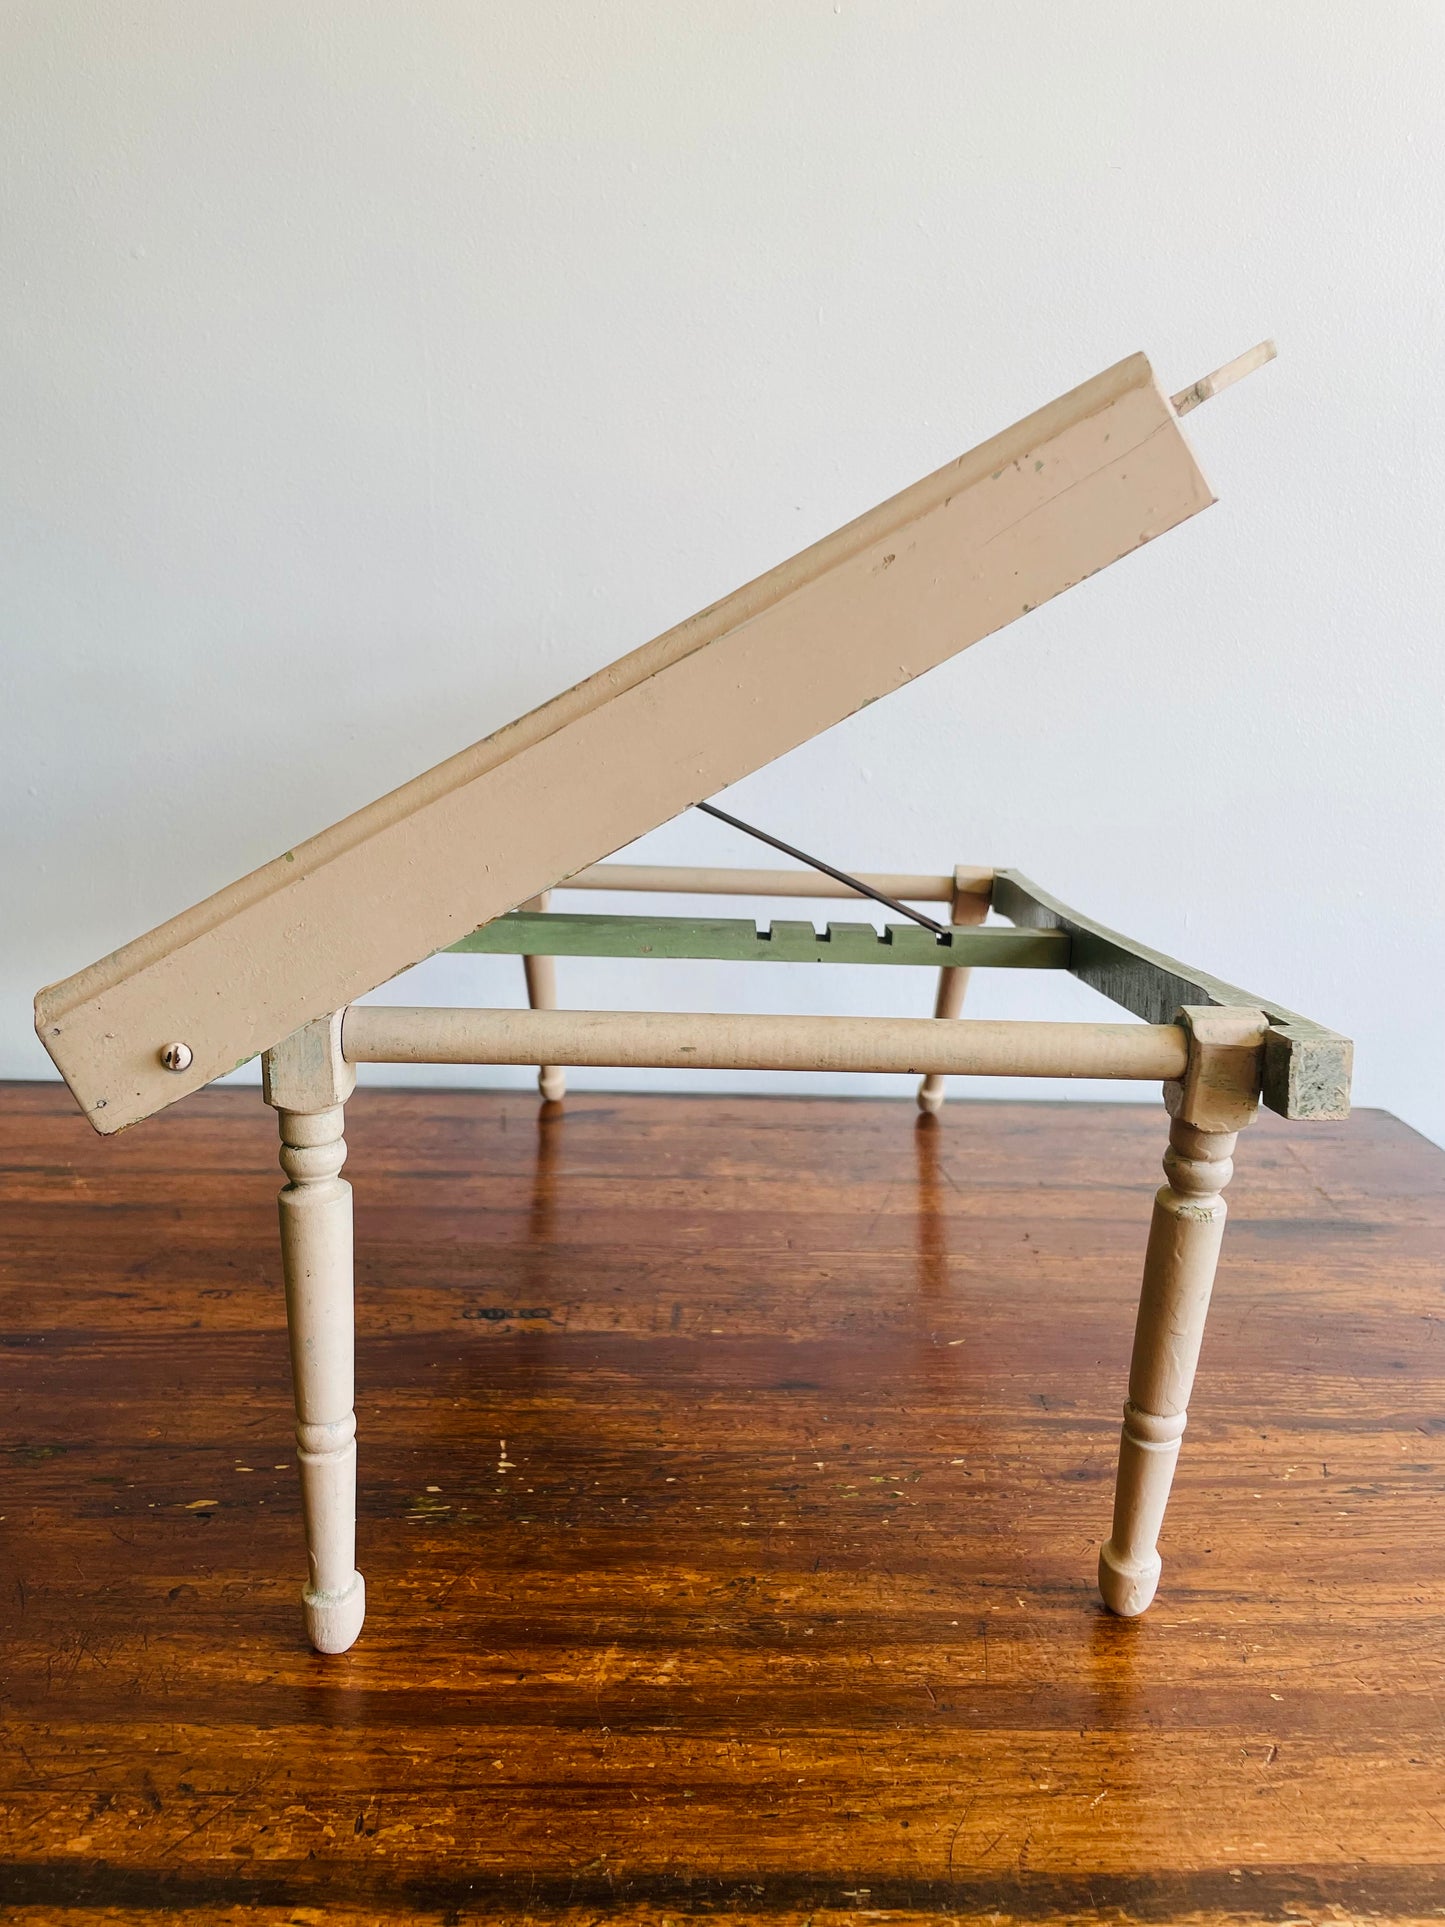 1940s General Wood Products Company The Golden Rule Line Folding Lap Desk or Easel Tray with 5 Adjustable Settings - Made in Cedarburg Wisconsin